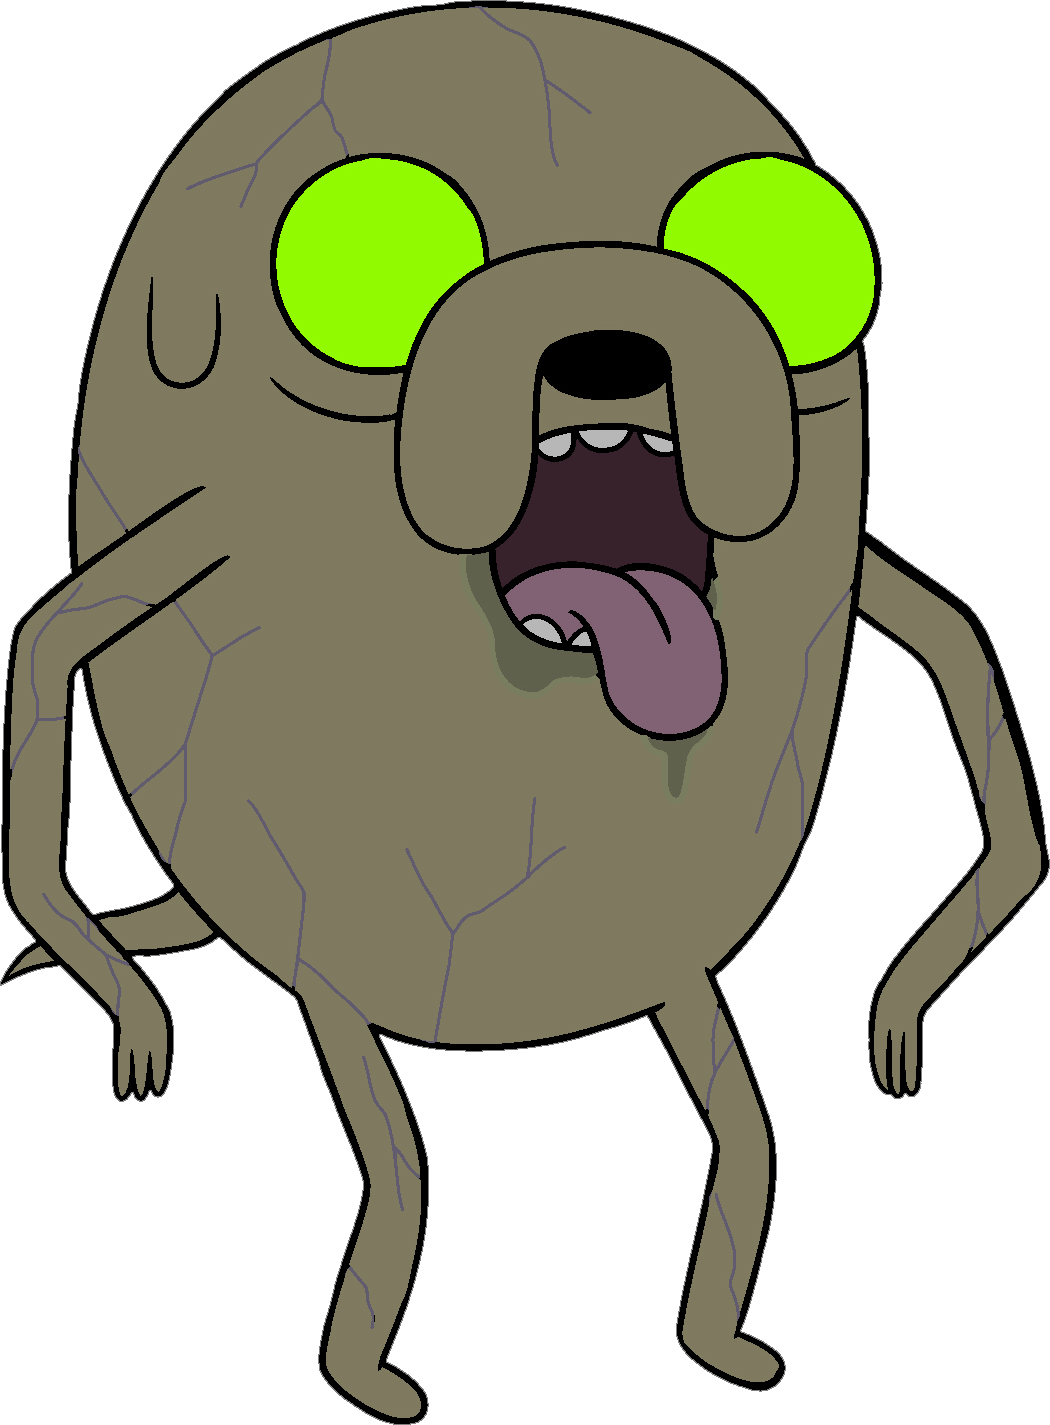 Zombies adventure time wiki. Zombie clipart zombie lady